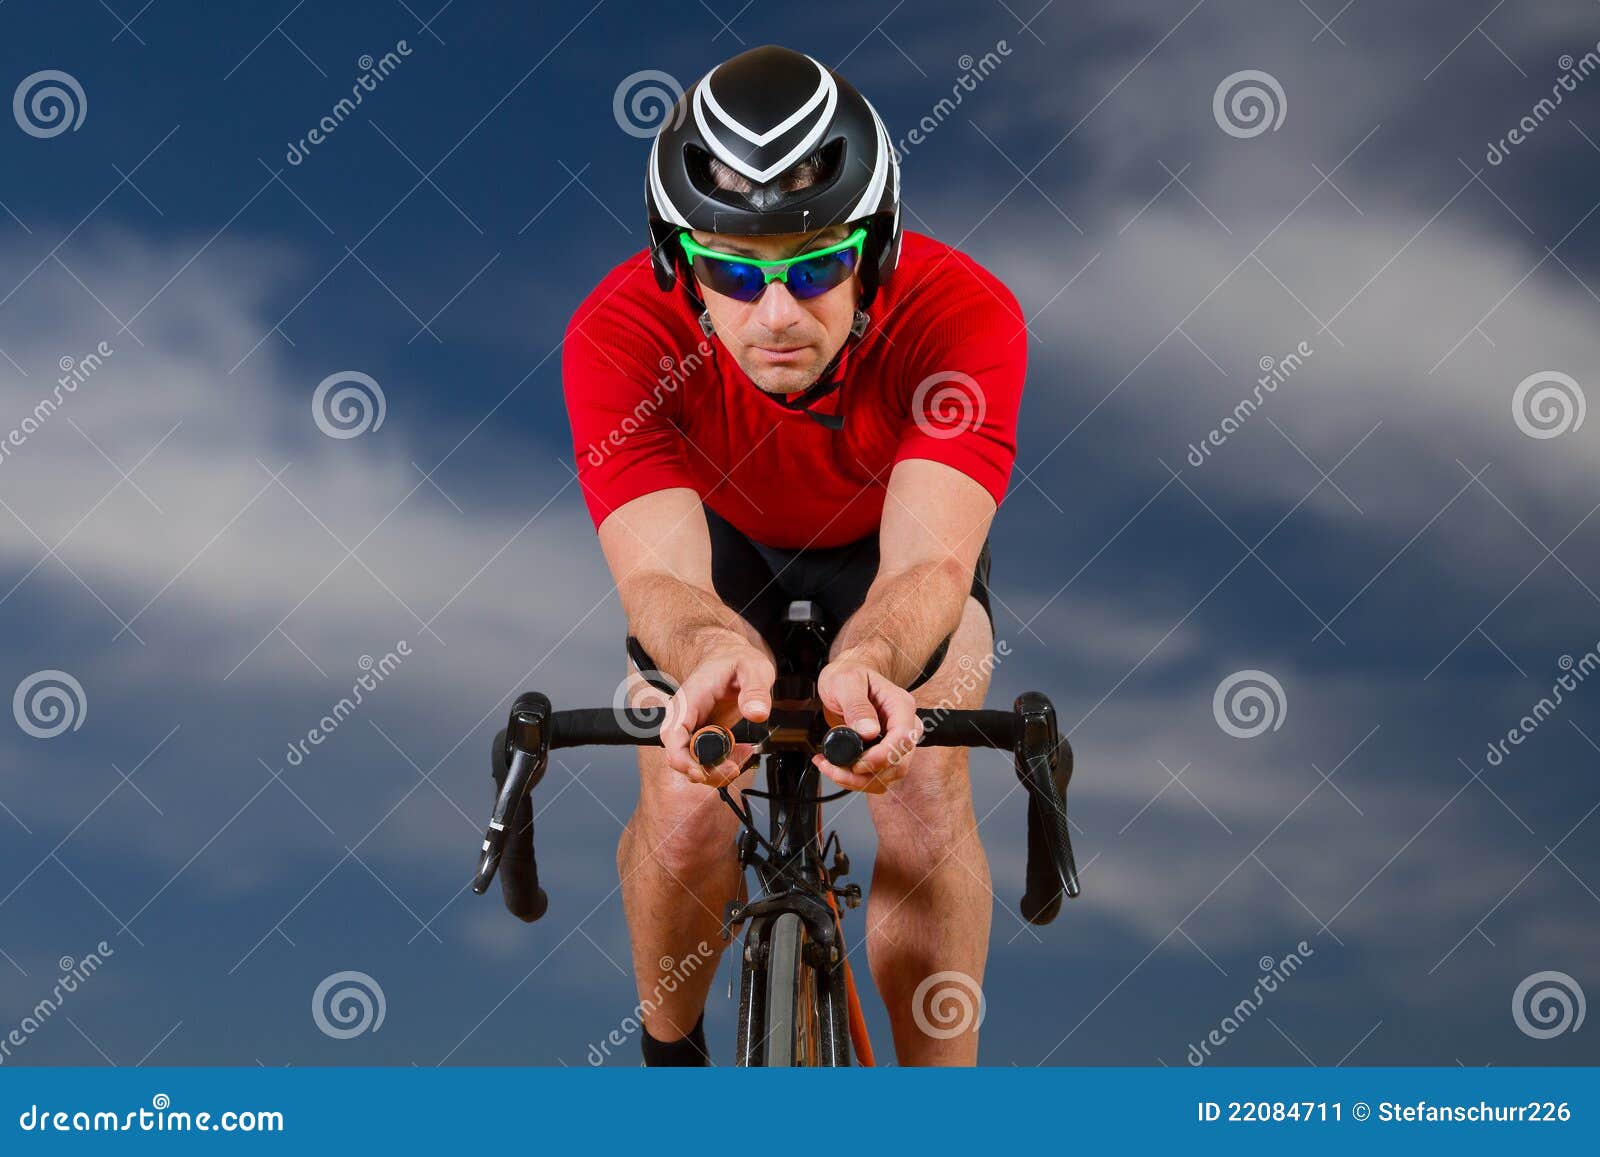 triathlete on a bicycle